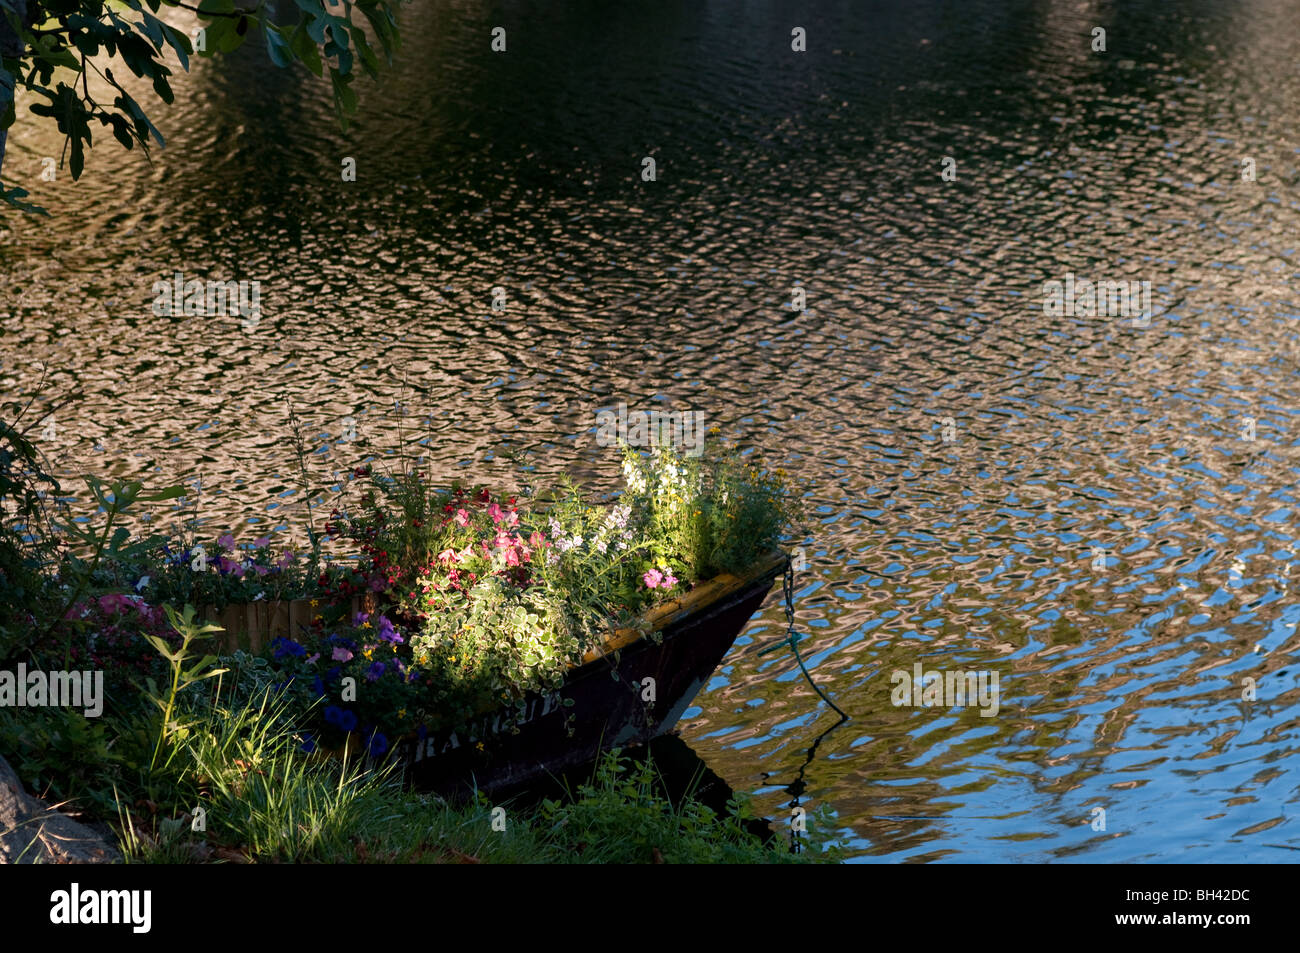 Boat filled with flowers on the river in Valleraugue village, Cevenne, France Stock Photo